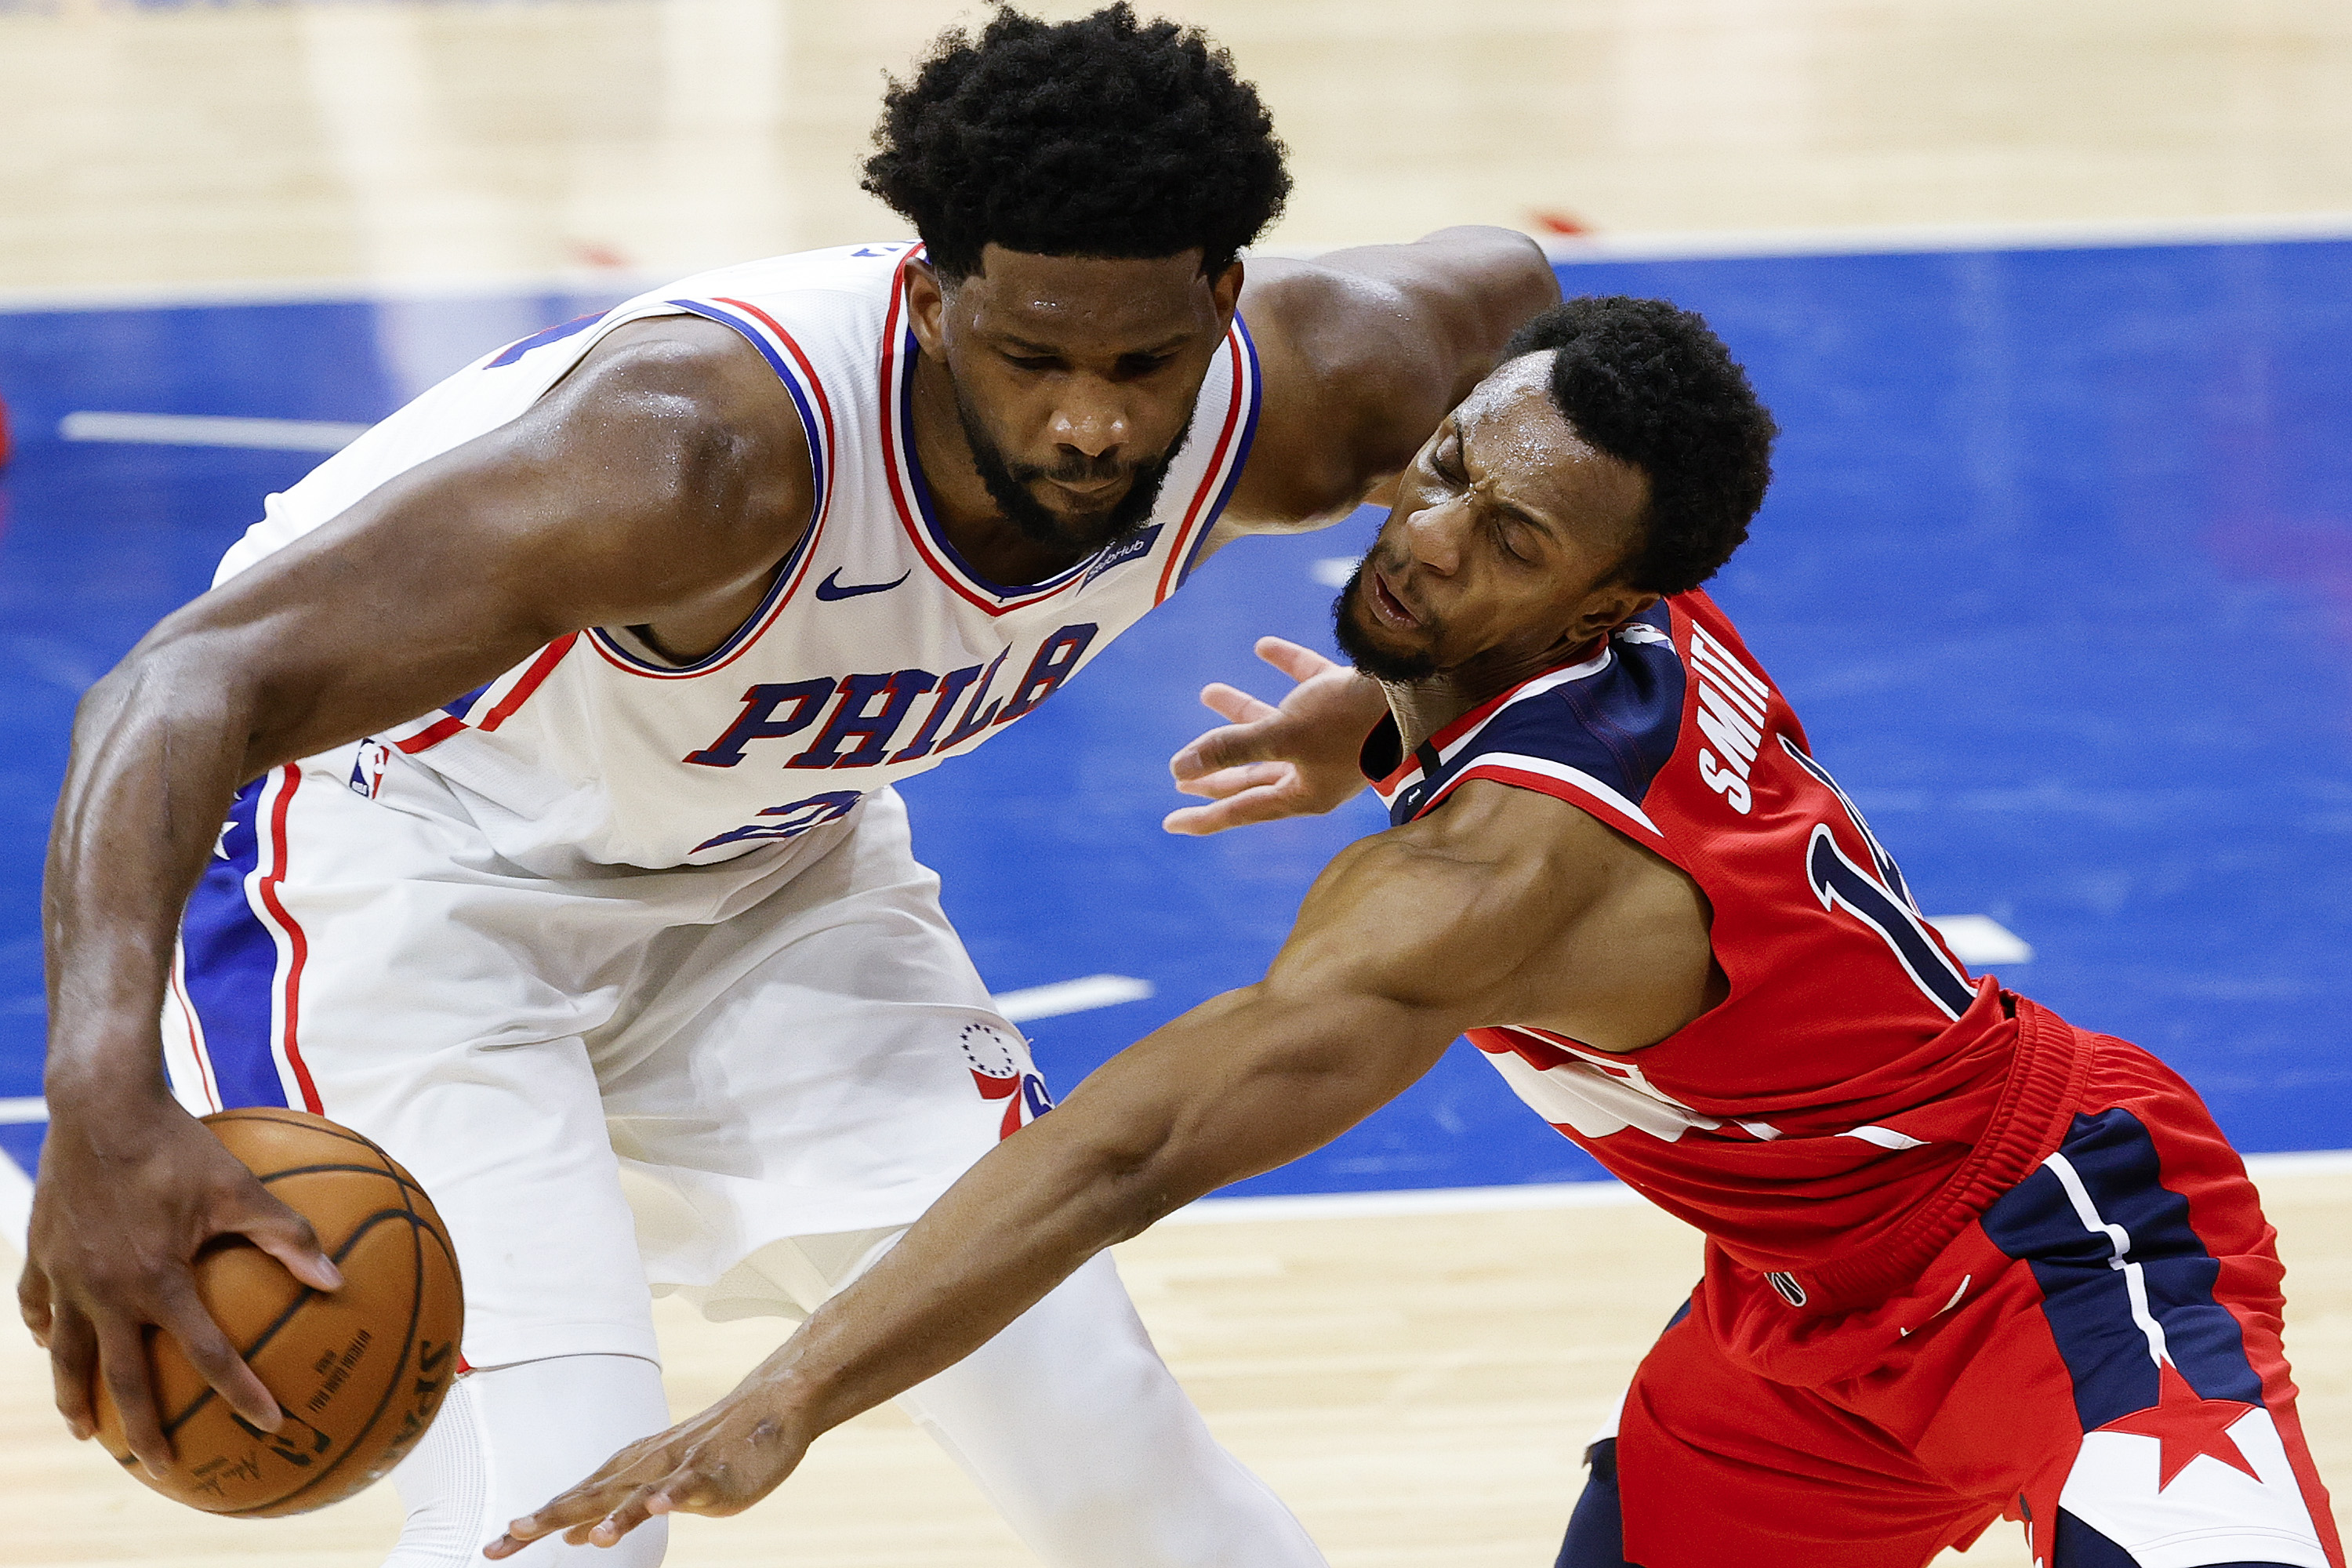 Philadelphia 76ers vs Washington Wizards free live stream, Game 2 score, odds, time, TV channel, how to watch NBA playoffs online (5/26/21)